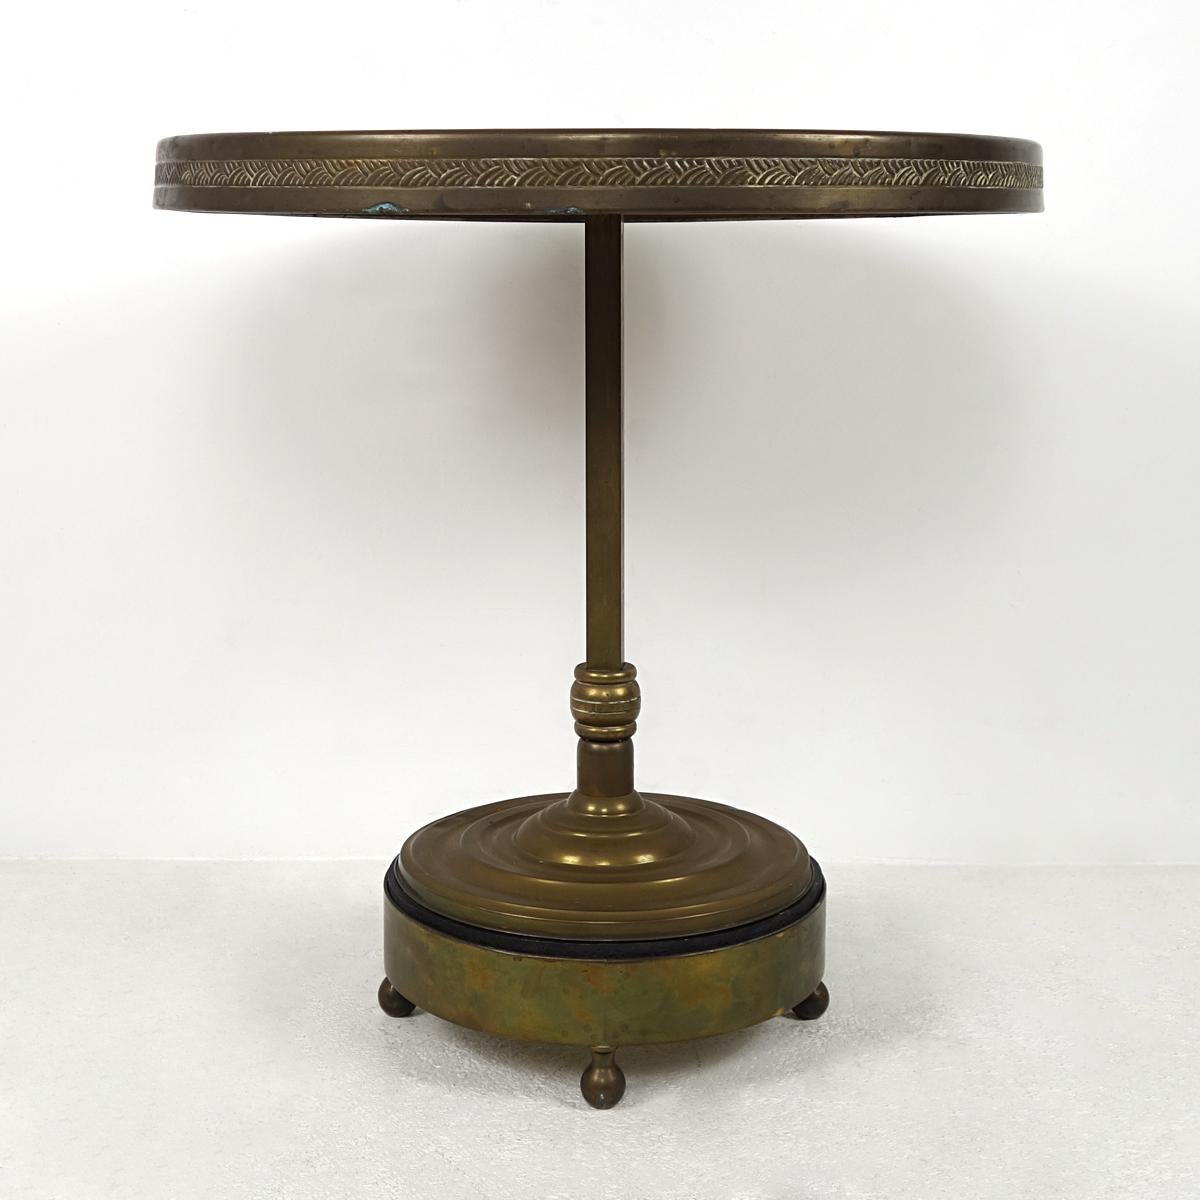 Moorish Antique Moroccan Occasional Table with Hammered and Engraved Copper Top